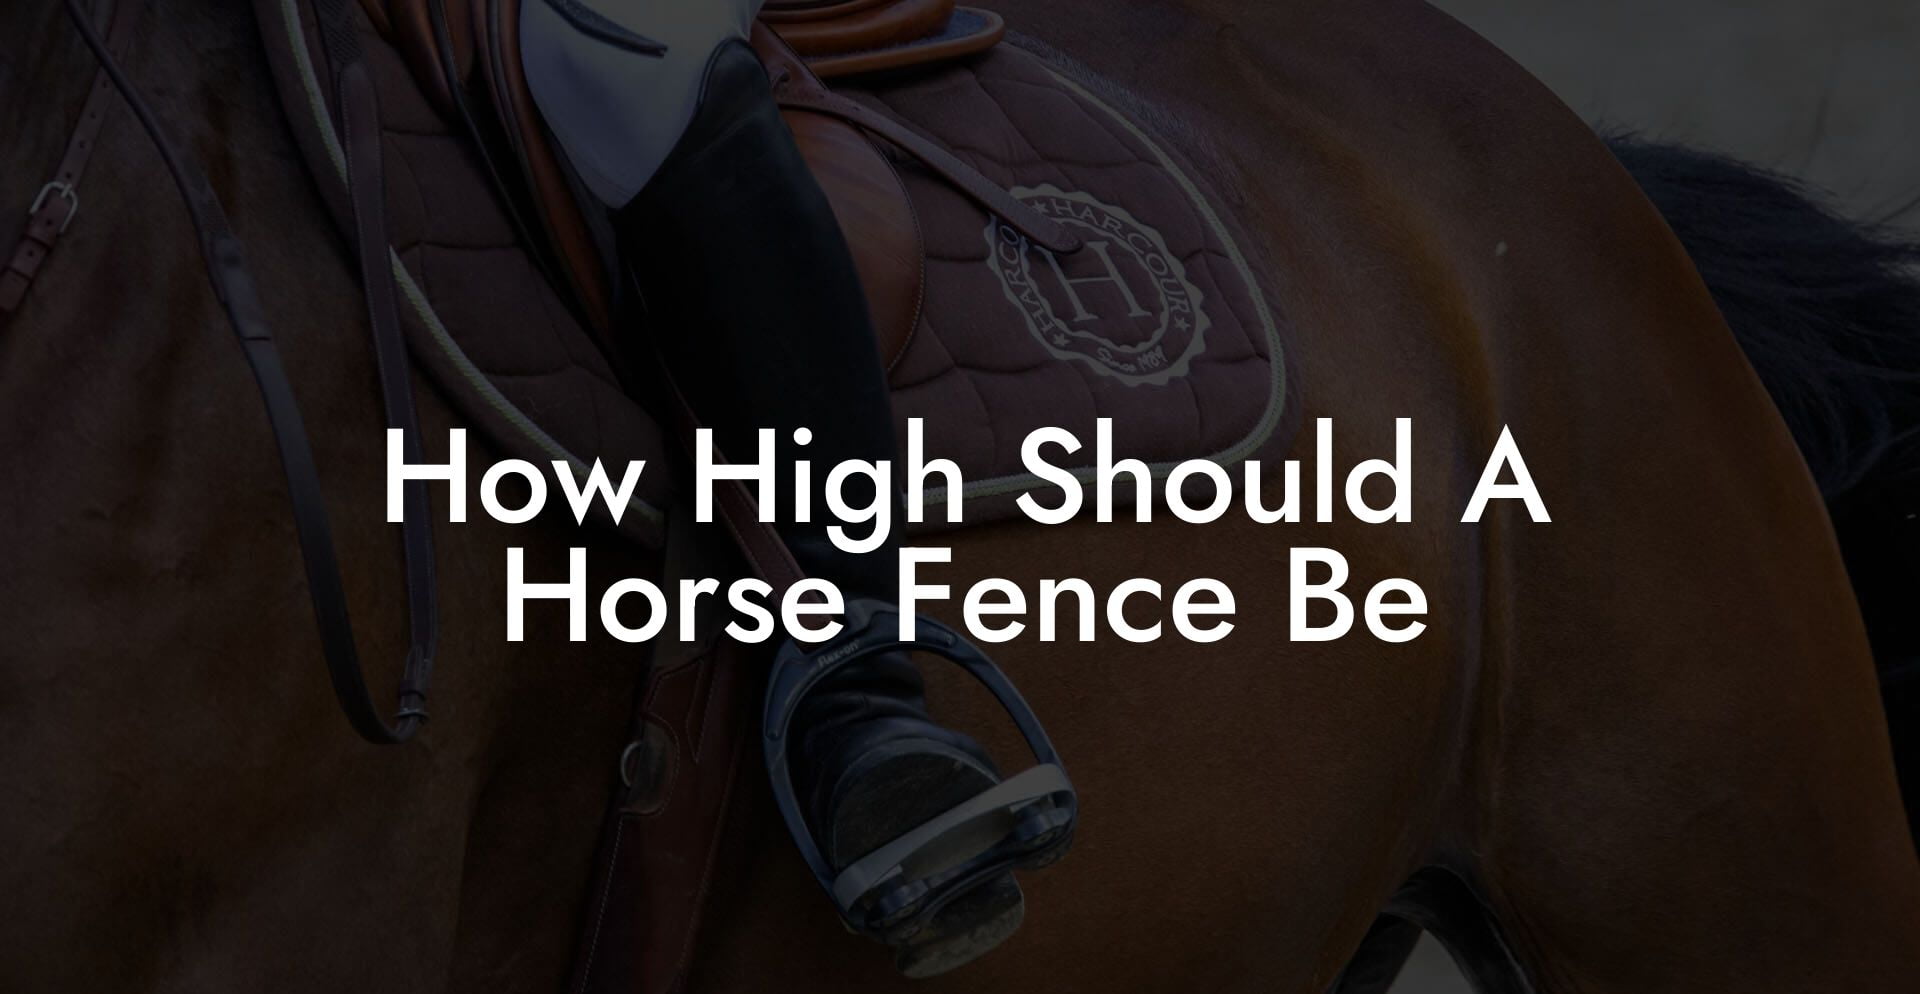 How High Should A Horse Fence Be